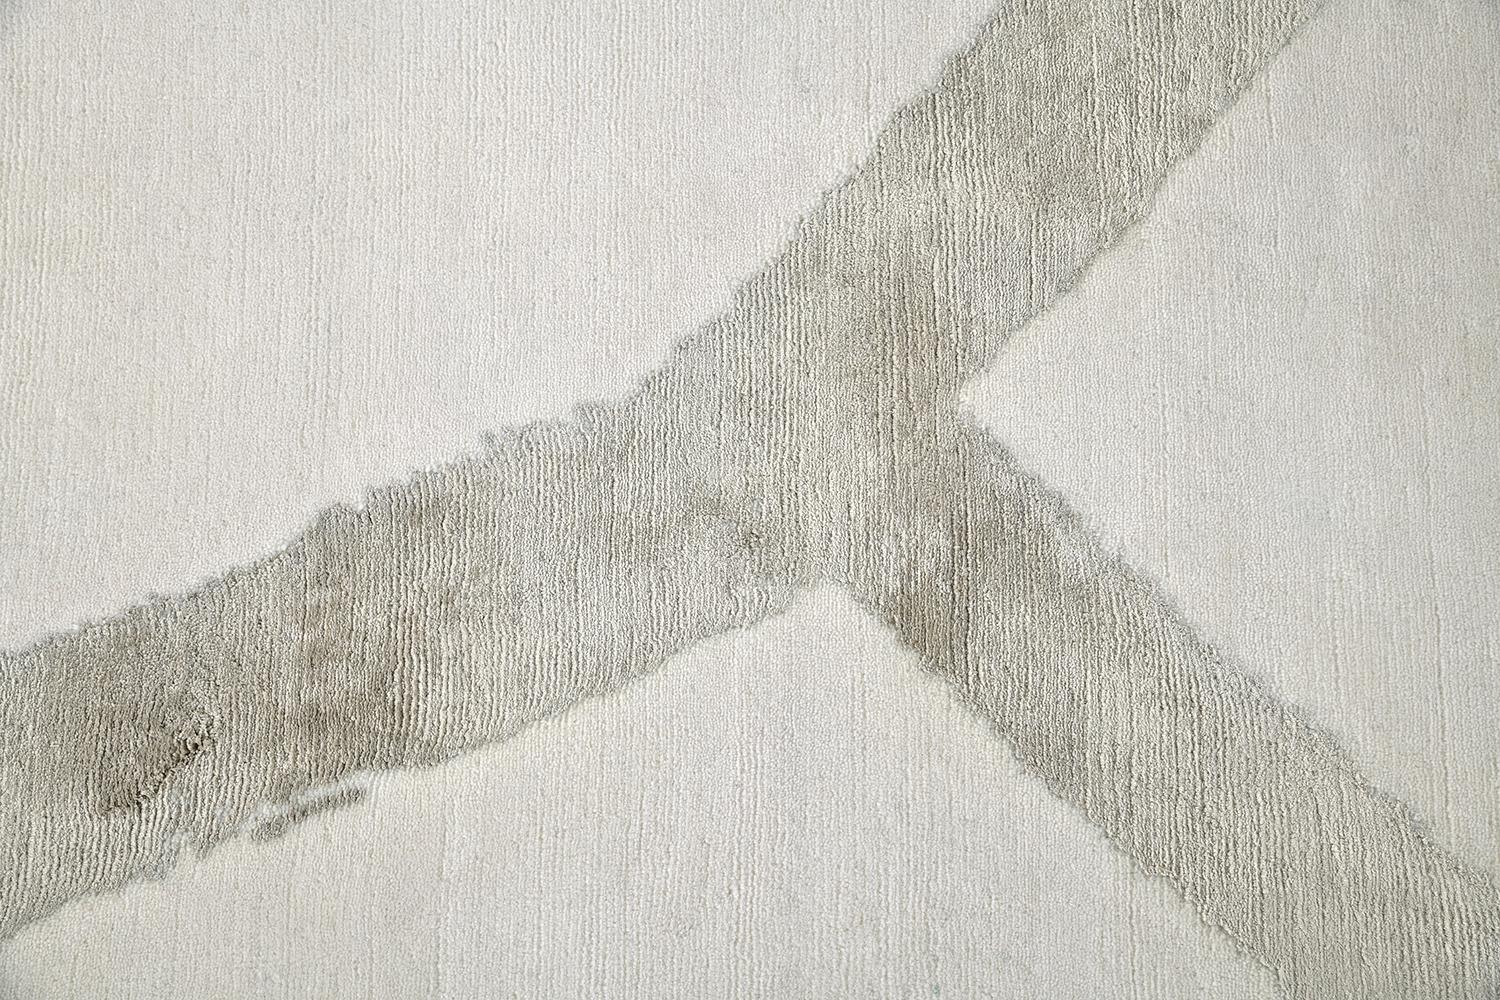 The simple gestures of a painting are captured and preserved in silk on a wool field. The champagne silk shapes are sophisticated yet playful. “Rhyme or Reason” is perfect if you wish to introduce some edge to a room or counter an overly serious